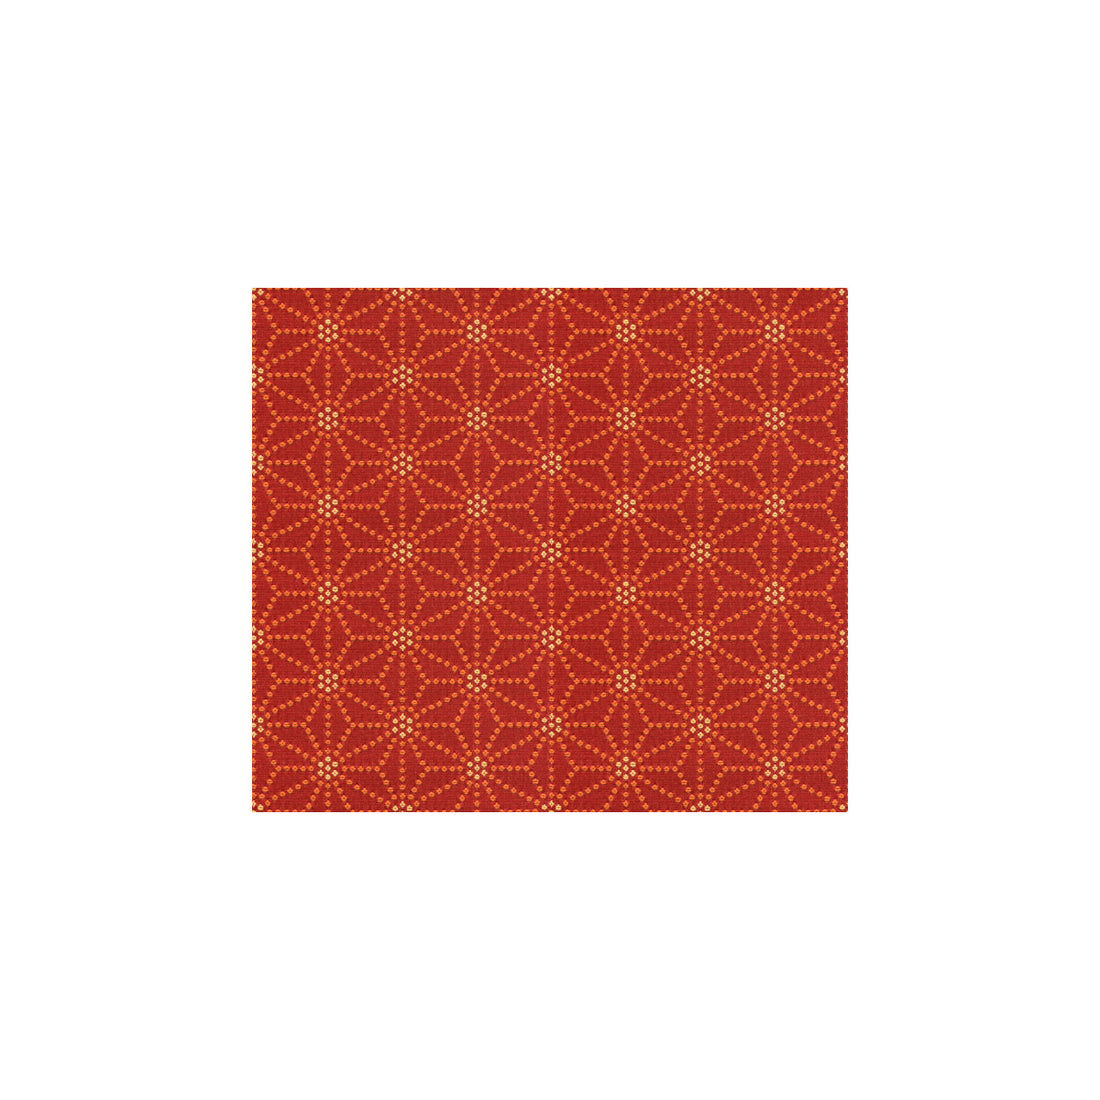 Japonica fabric in chili color - pattern 32849.424.0 - by Kravet Contract in the Contract Gis collection